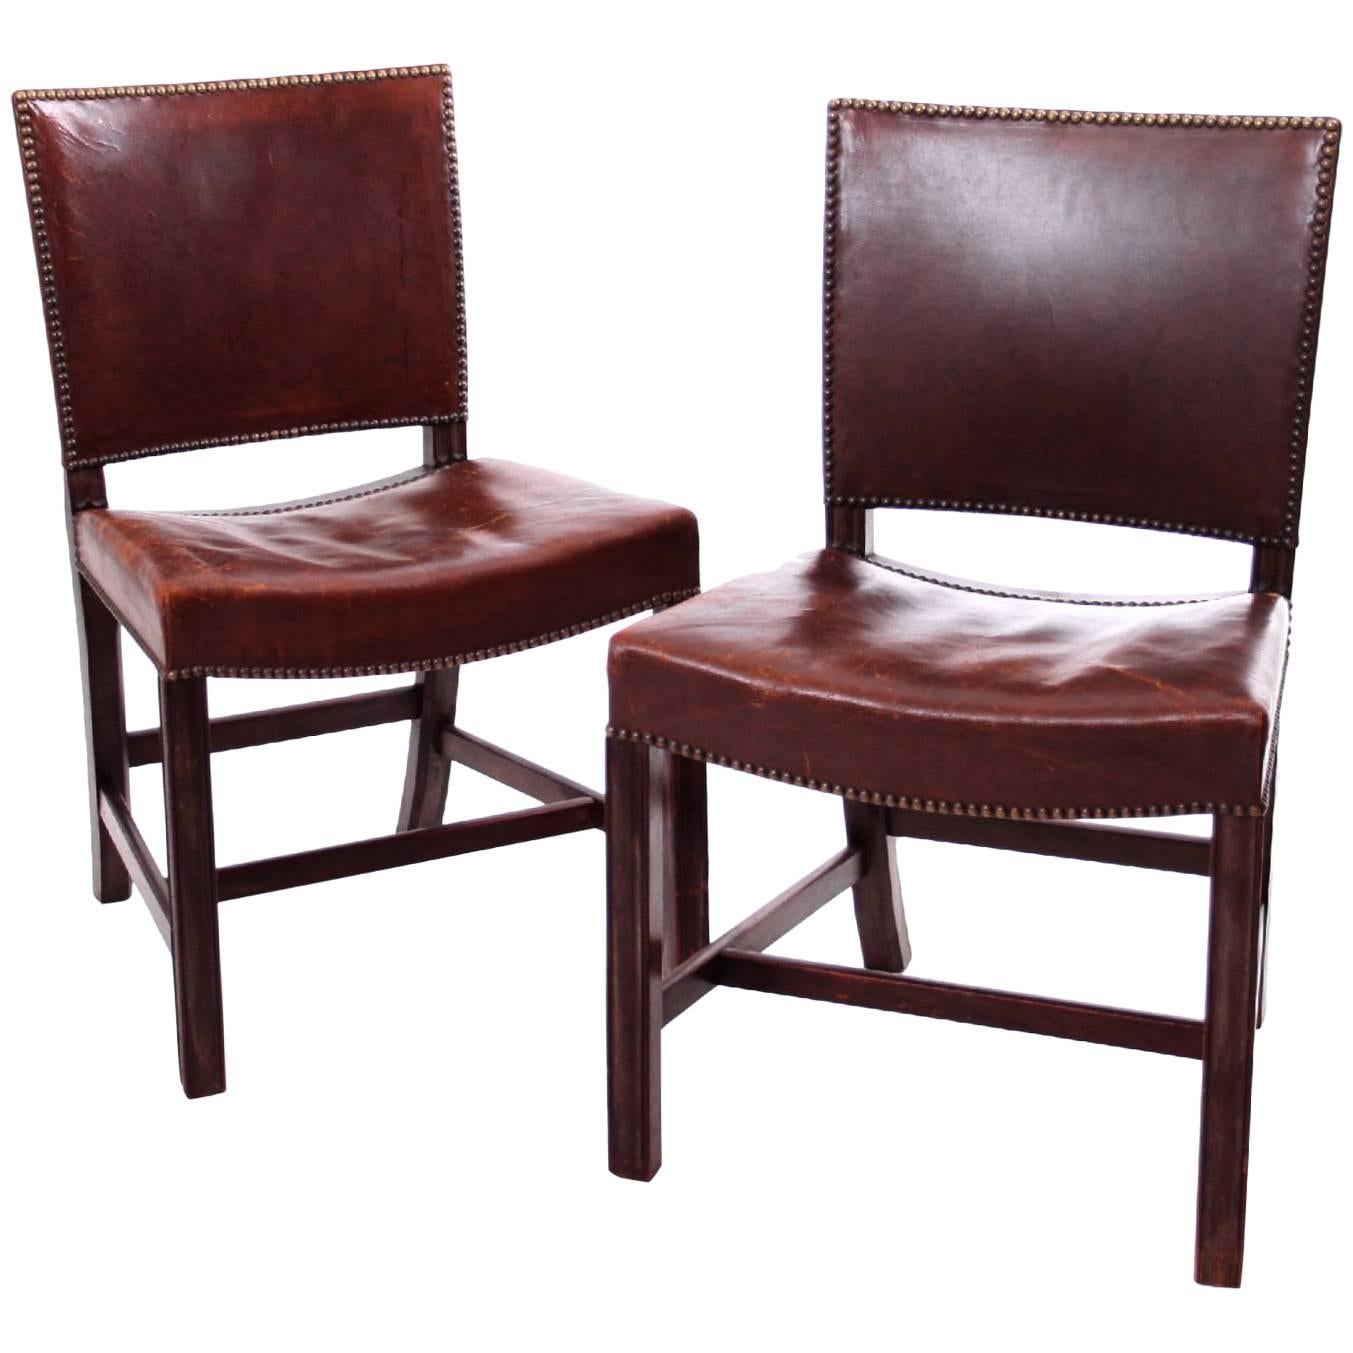 A Pair of Kaare Klint Red Chairs in Brown Leather by Rud Rasmussen, 1930s